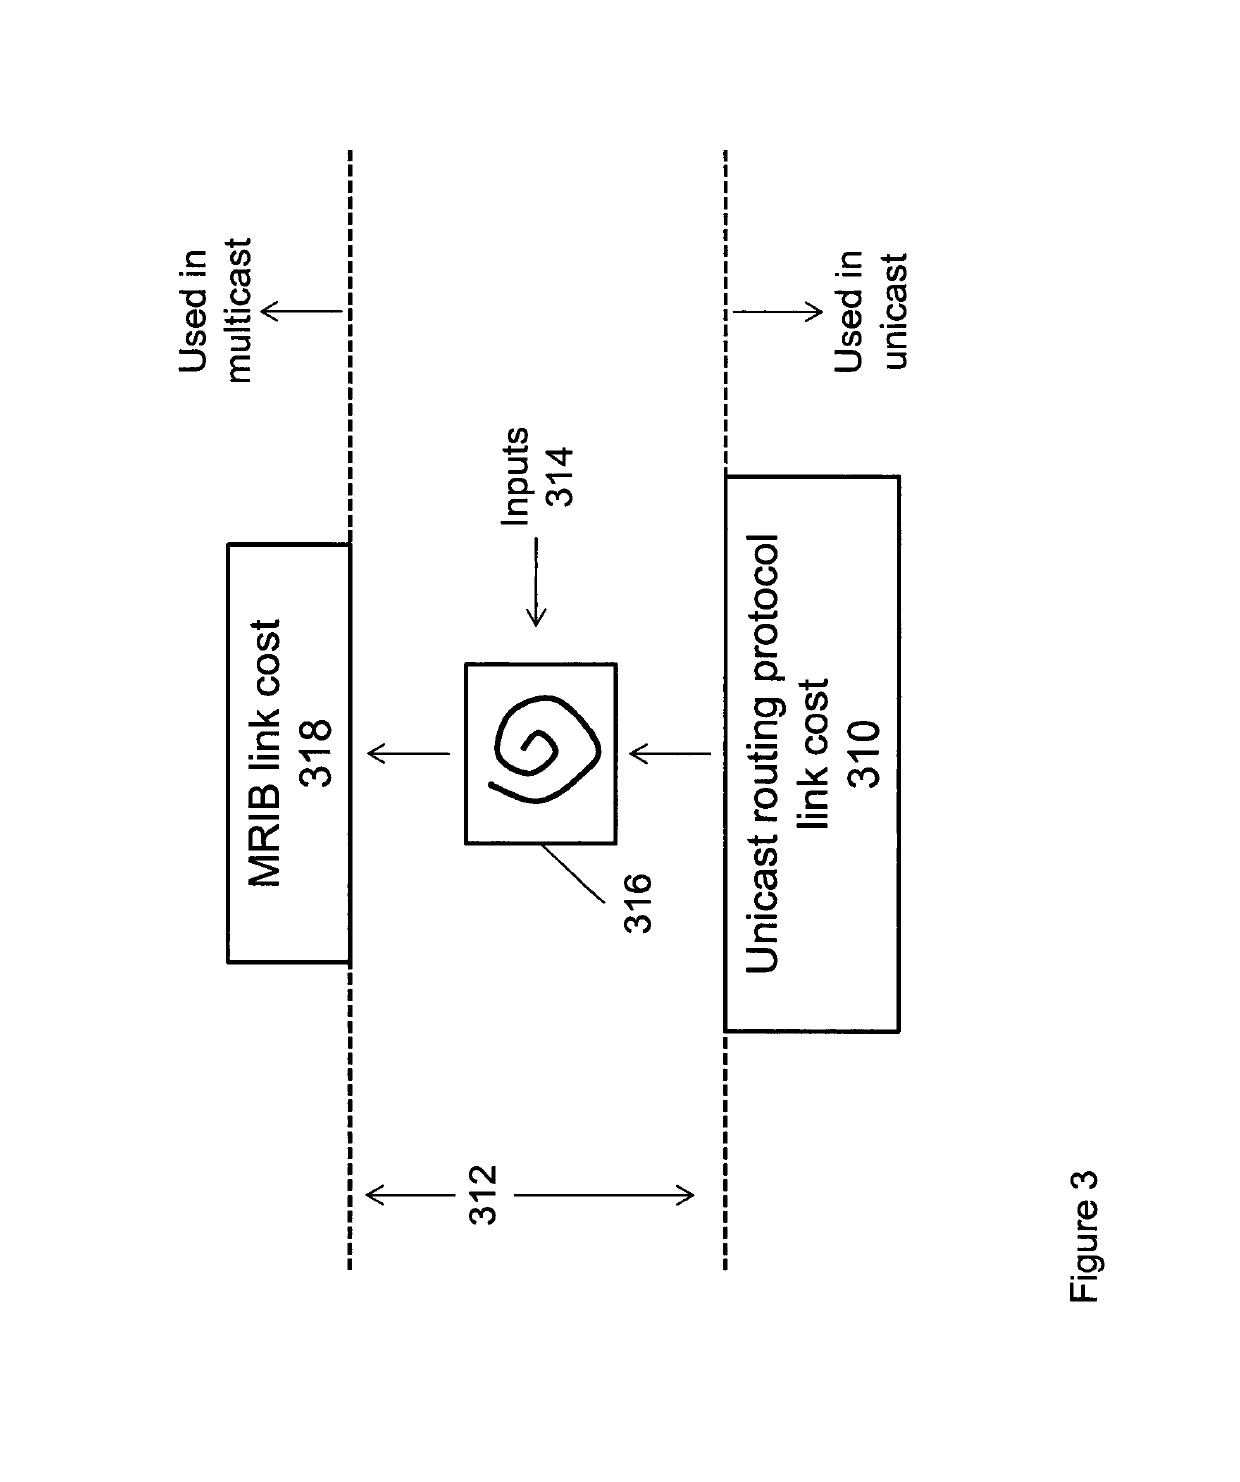 Multicast routing system and method